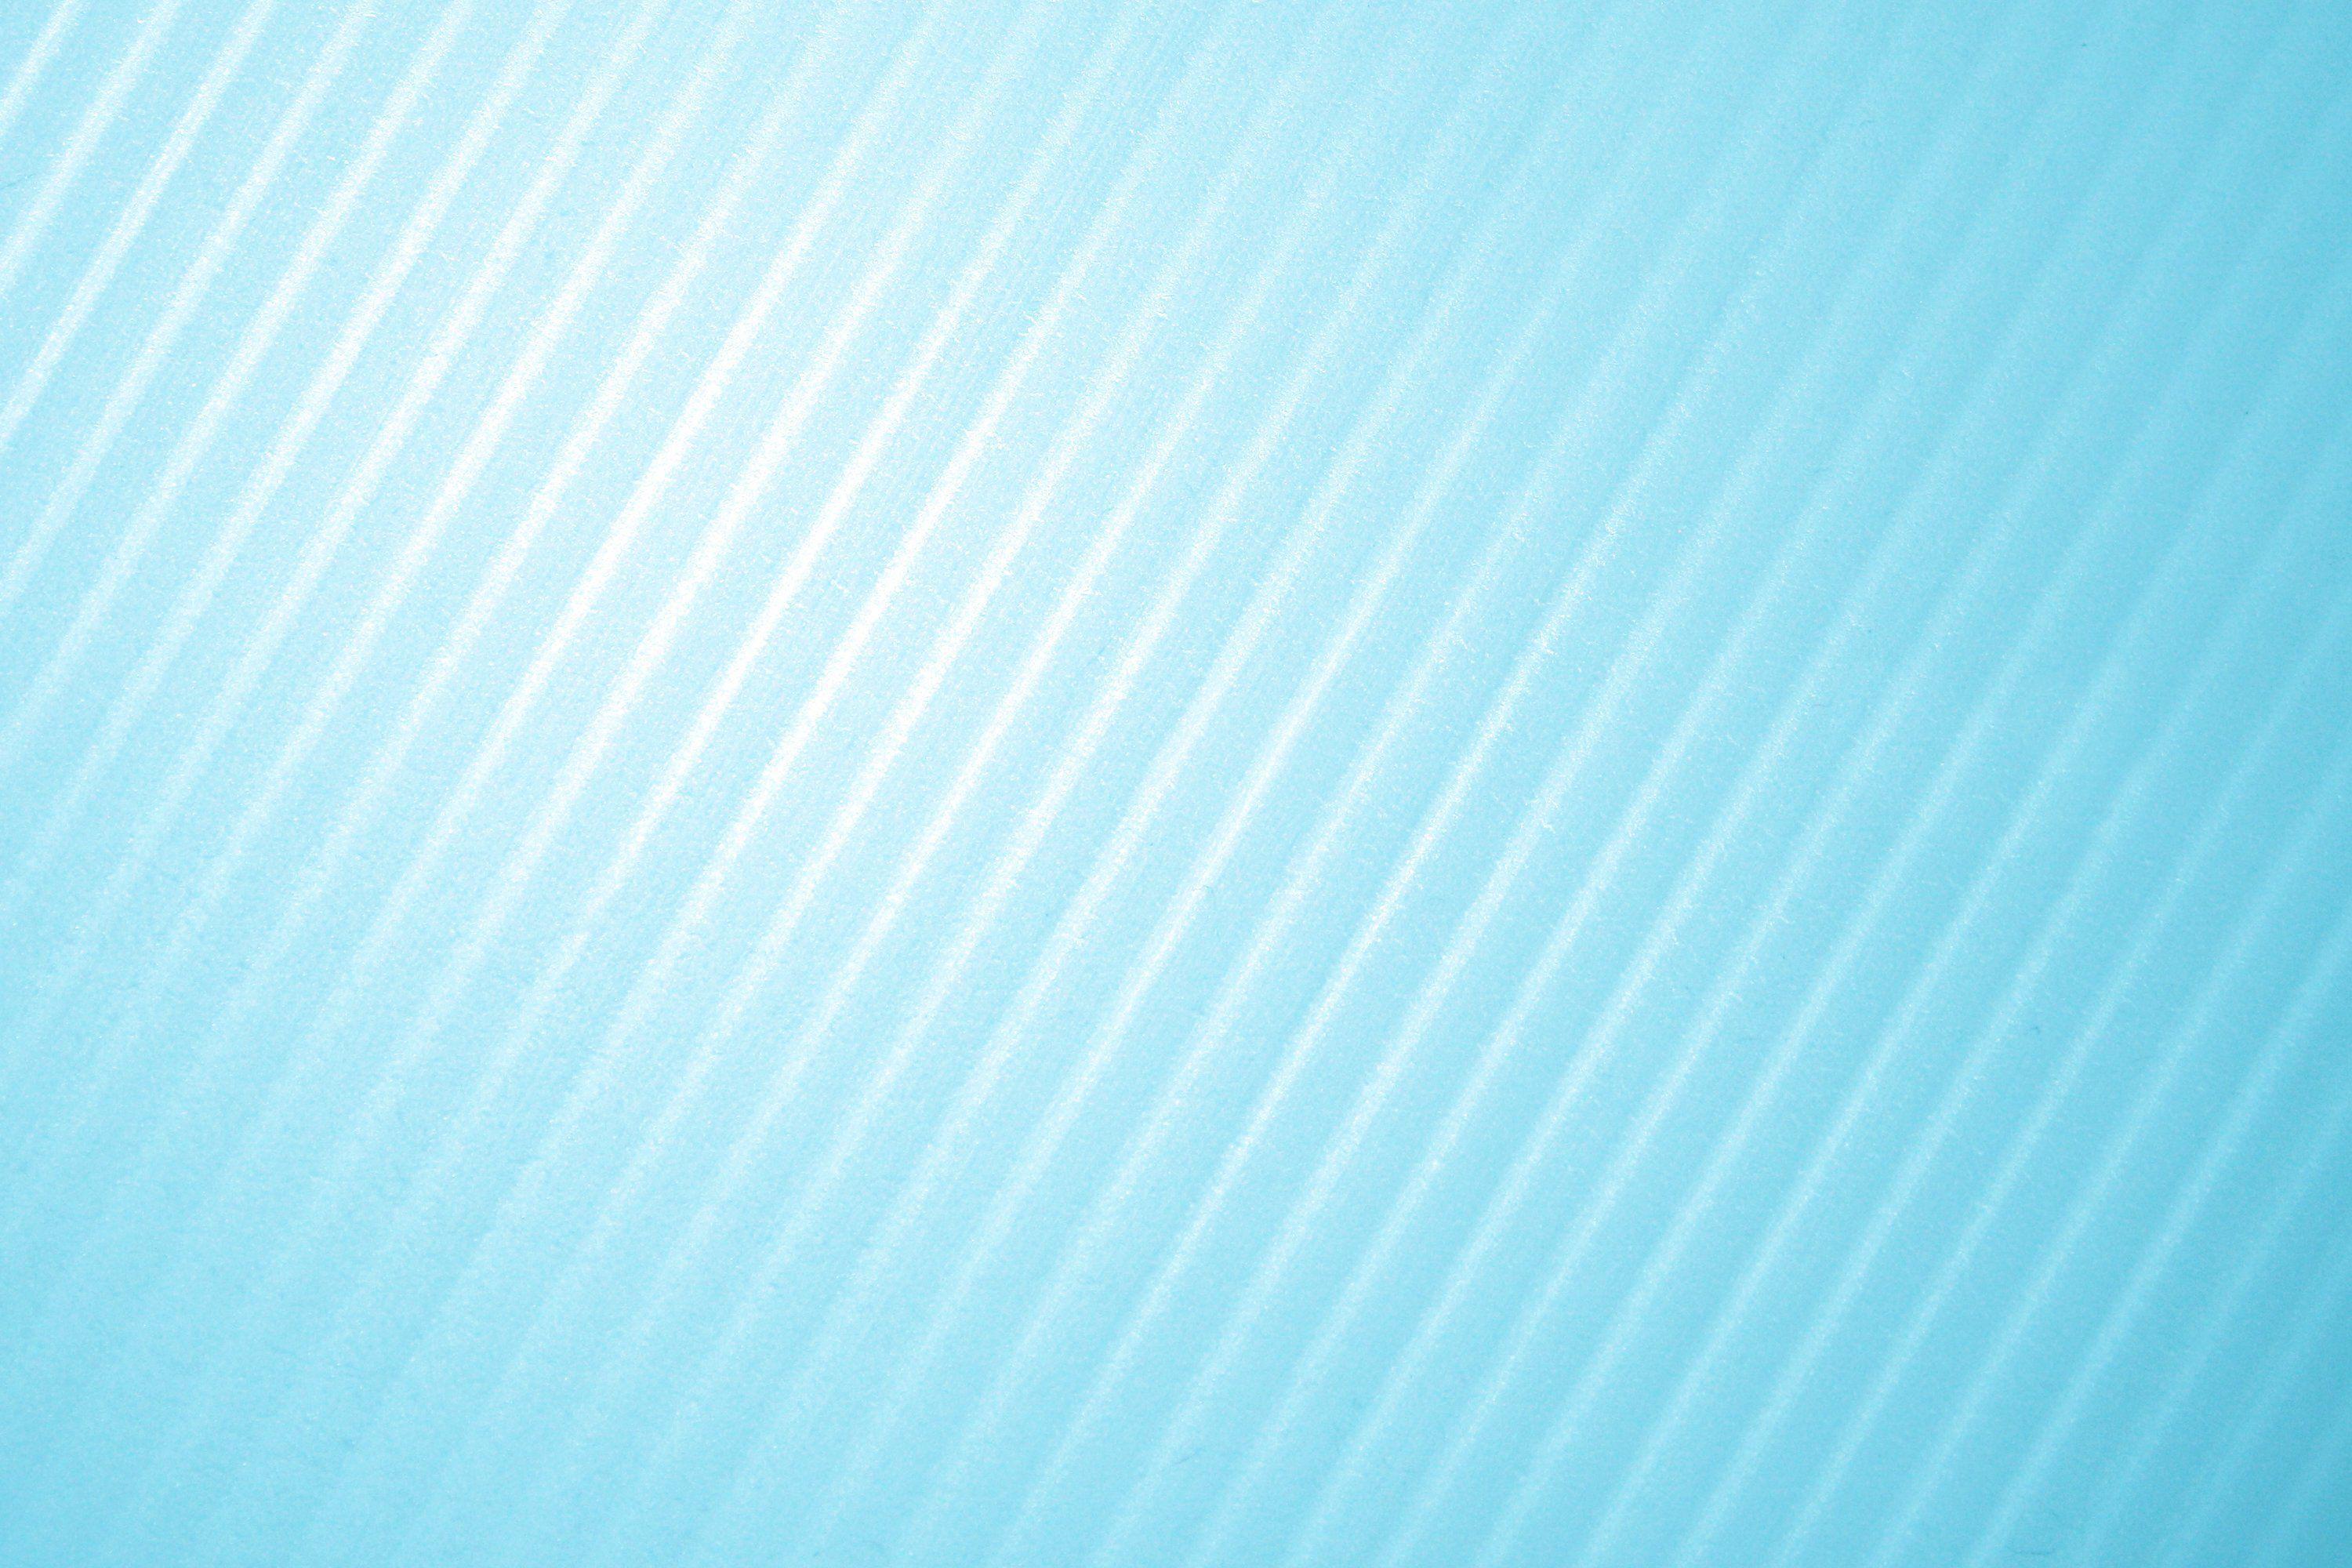 Image For > Light Blue Textured Backgrounds